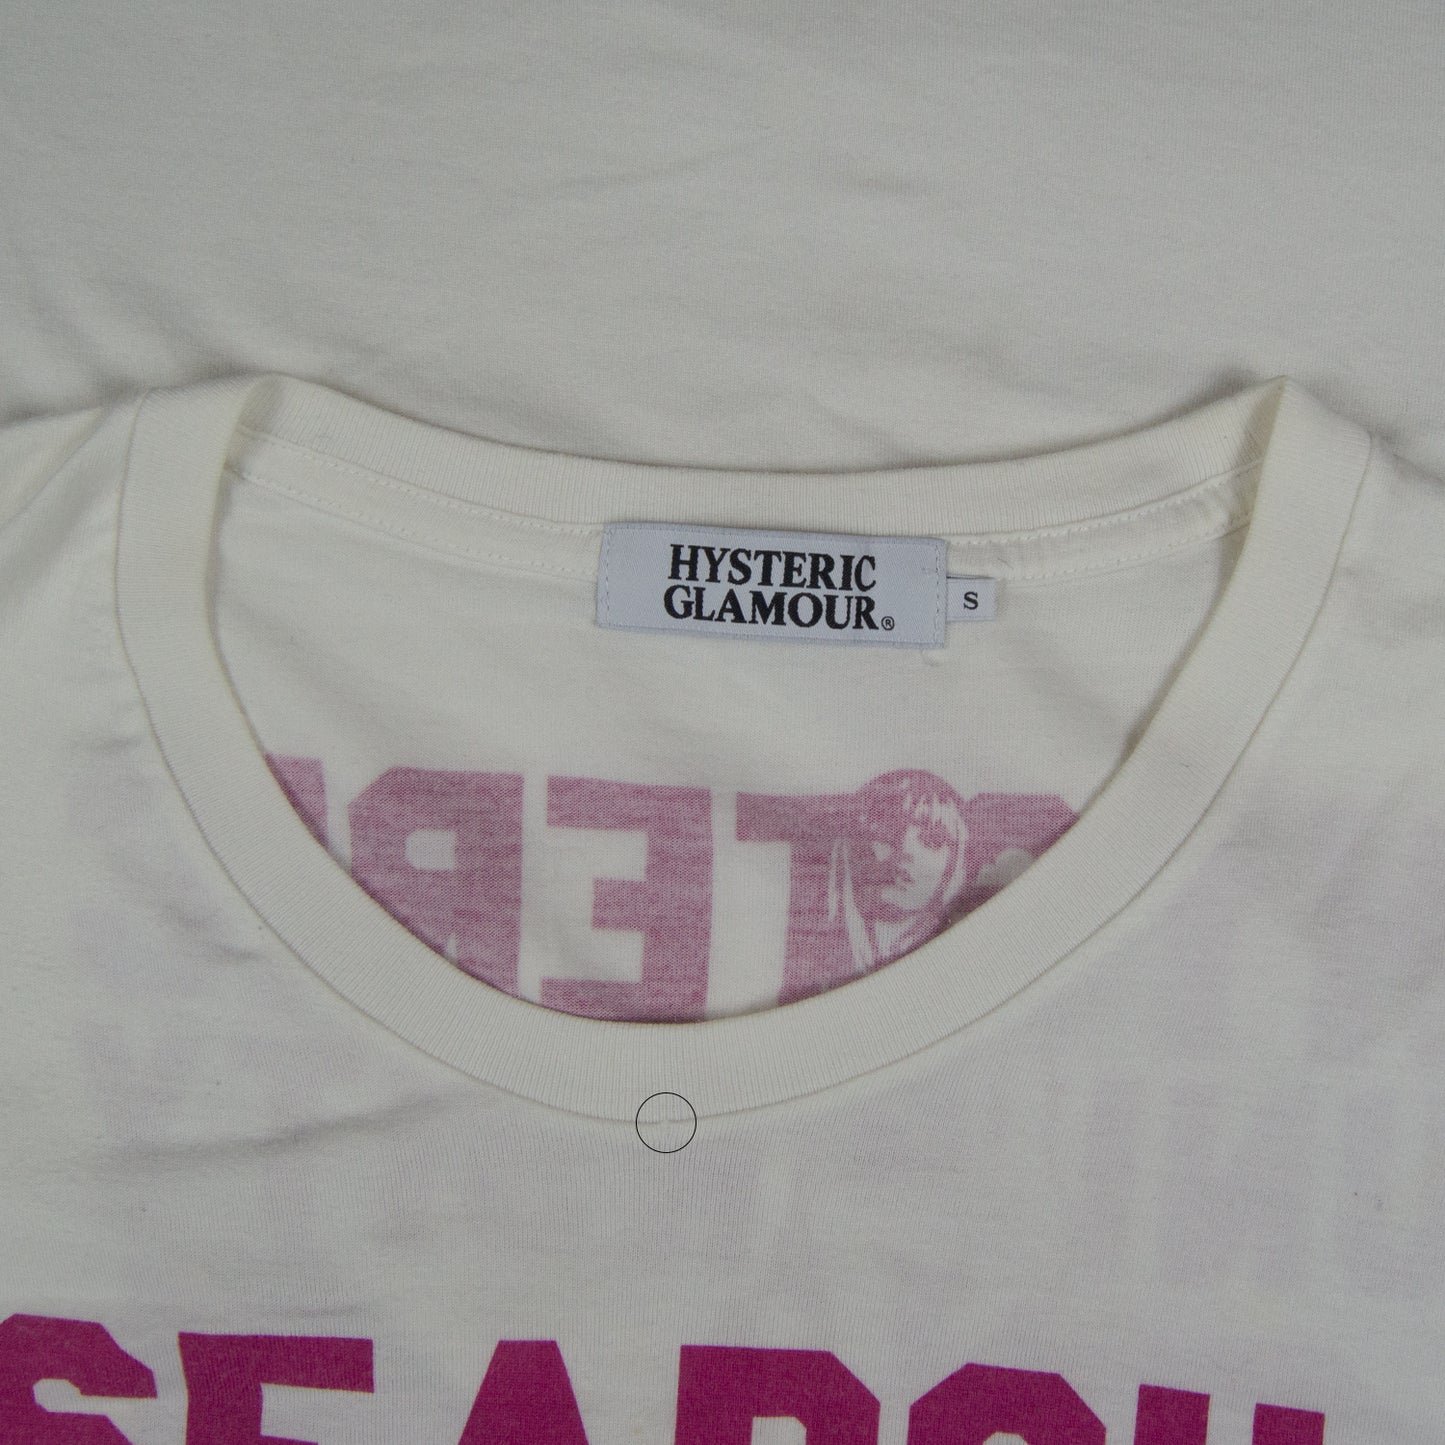 Hysteric Glamour Search And Destroy Tee